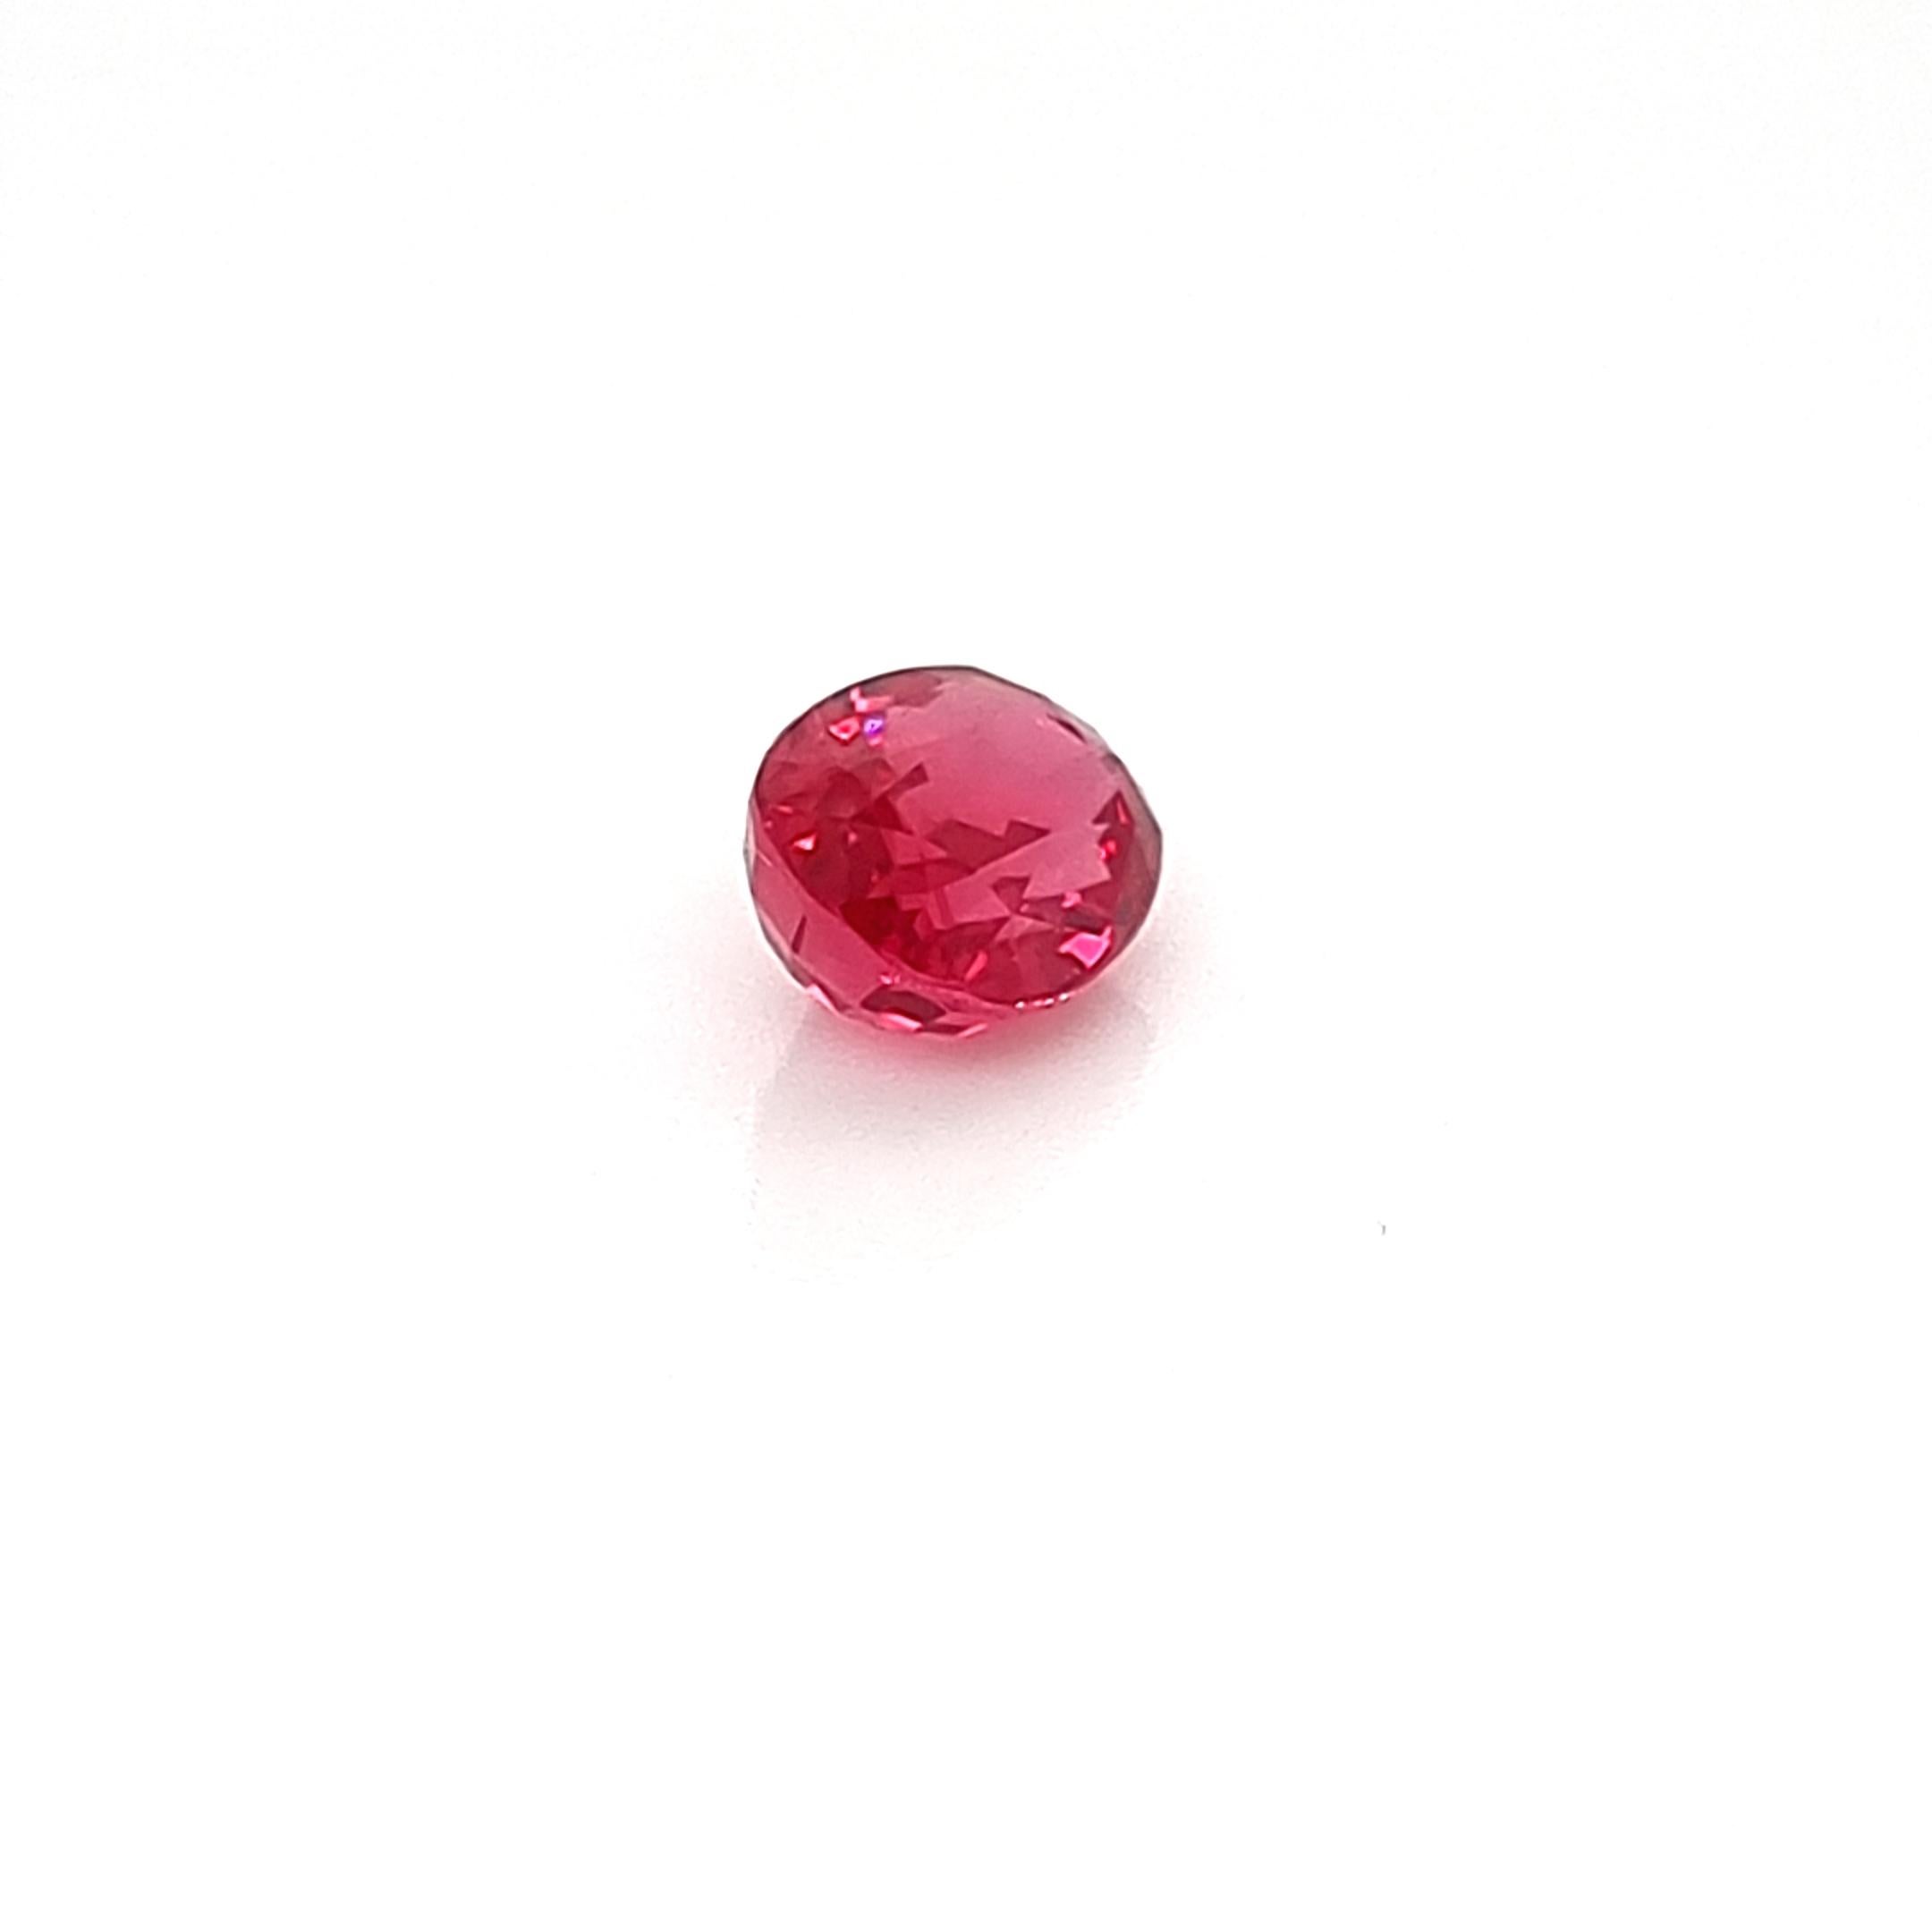 Red spinel from Vietnam. Oval shape.
9.03 x 7.00 x 4.99 mm
Certified by Lotus Laboratory.

No Treatments.

Weight - 2.74 carats.

Ideally can be transformed into a ring or a pendant.